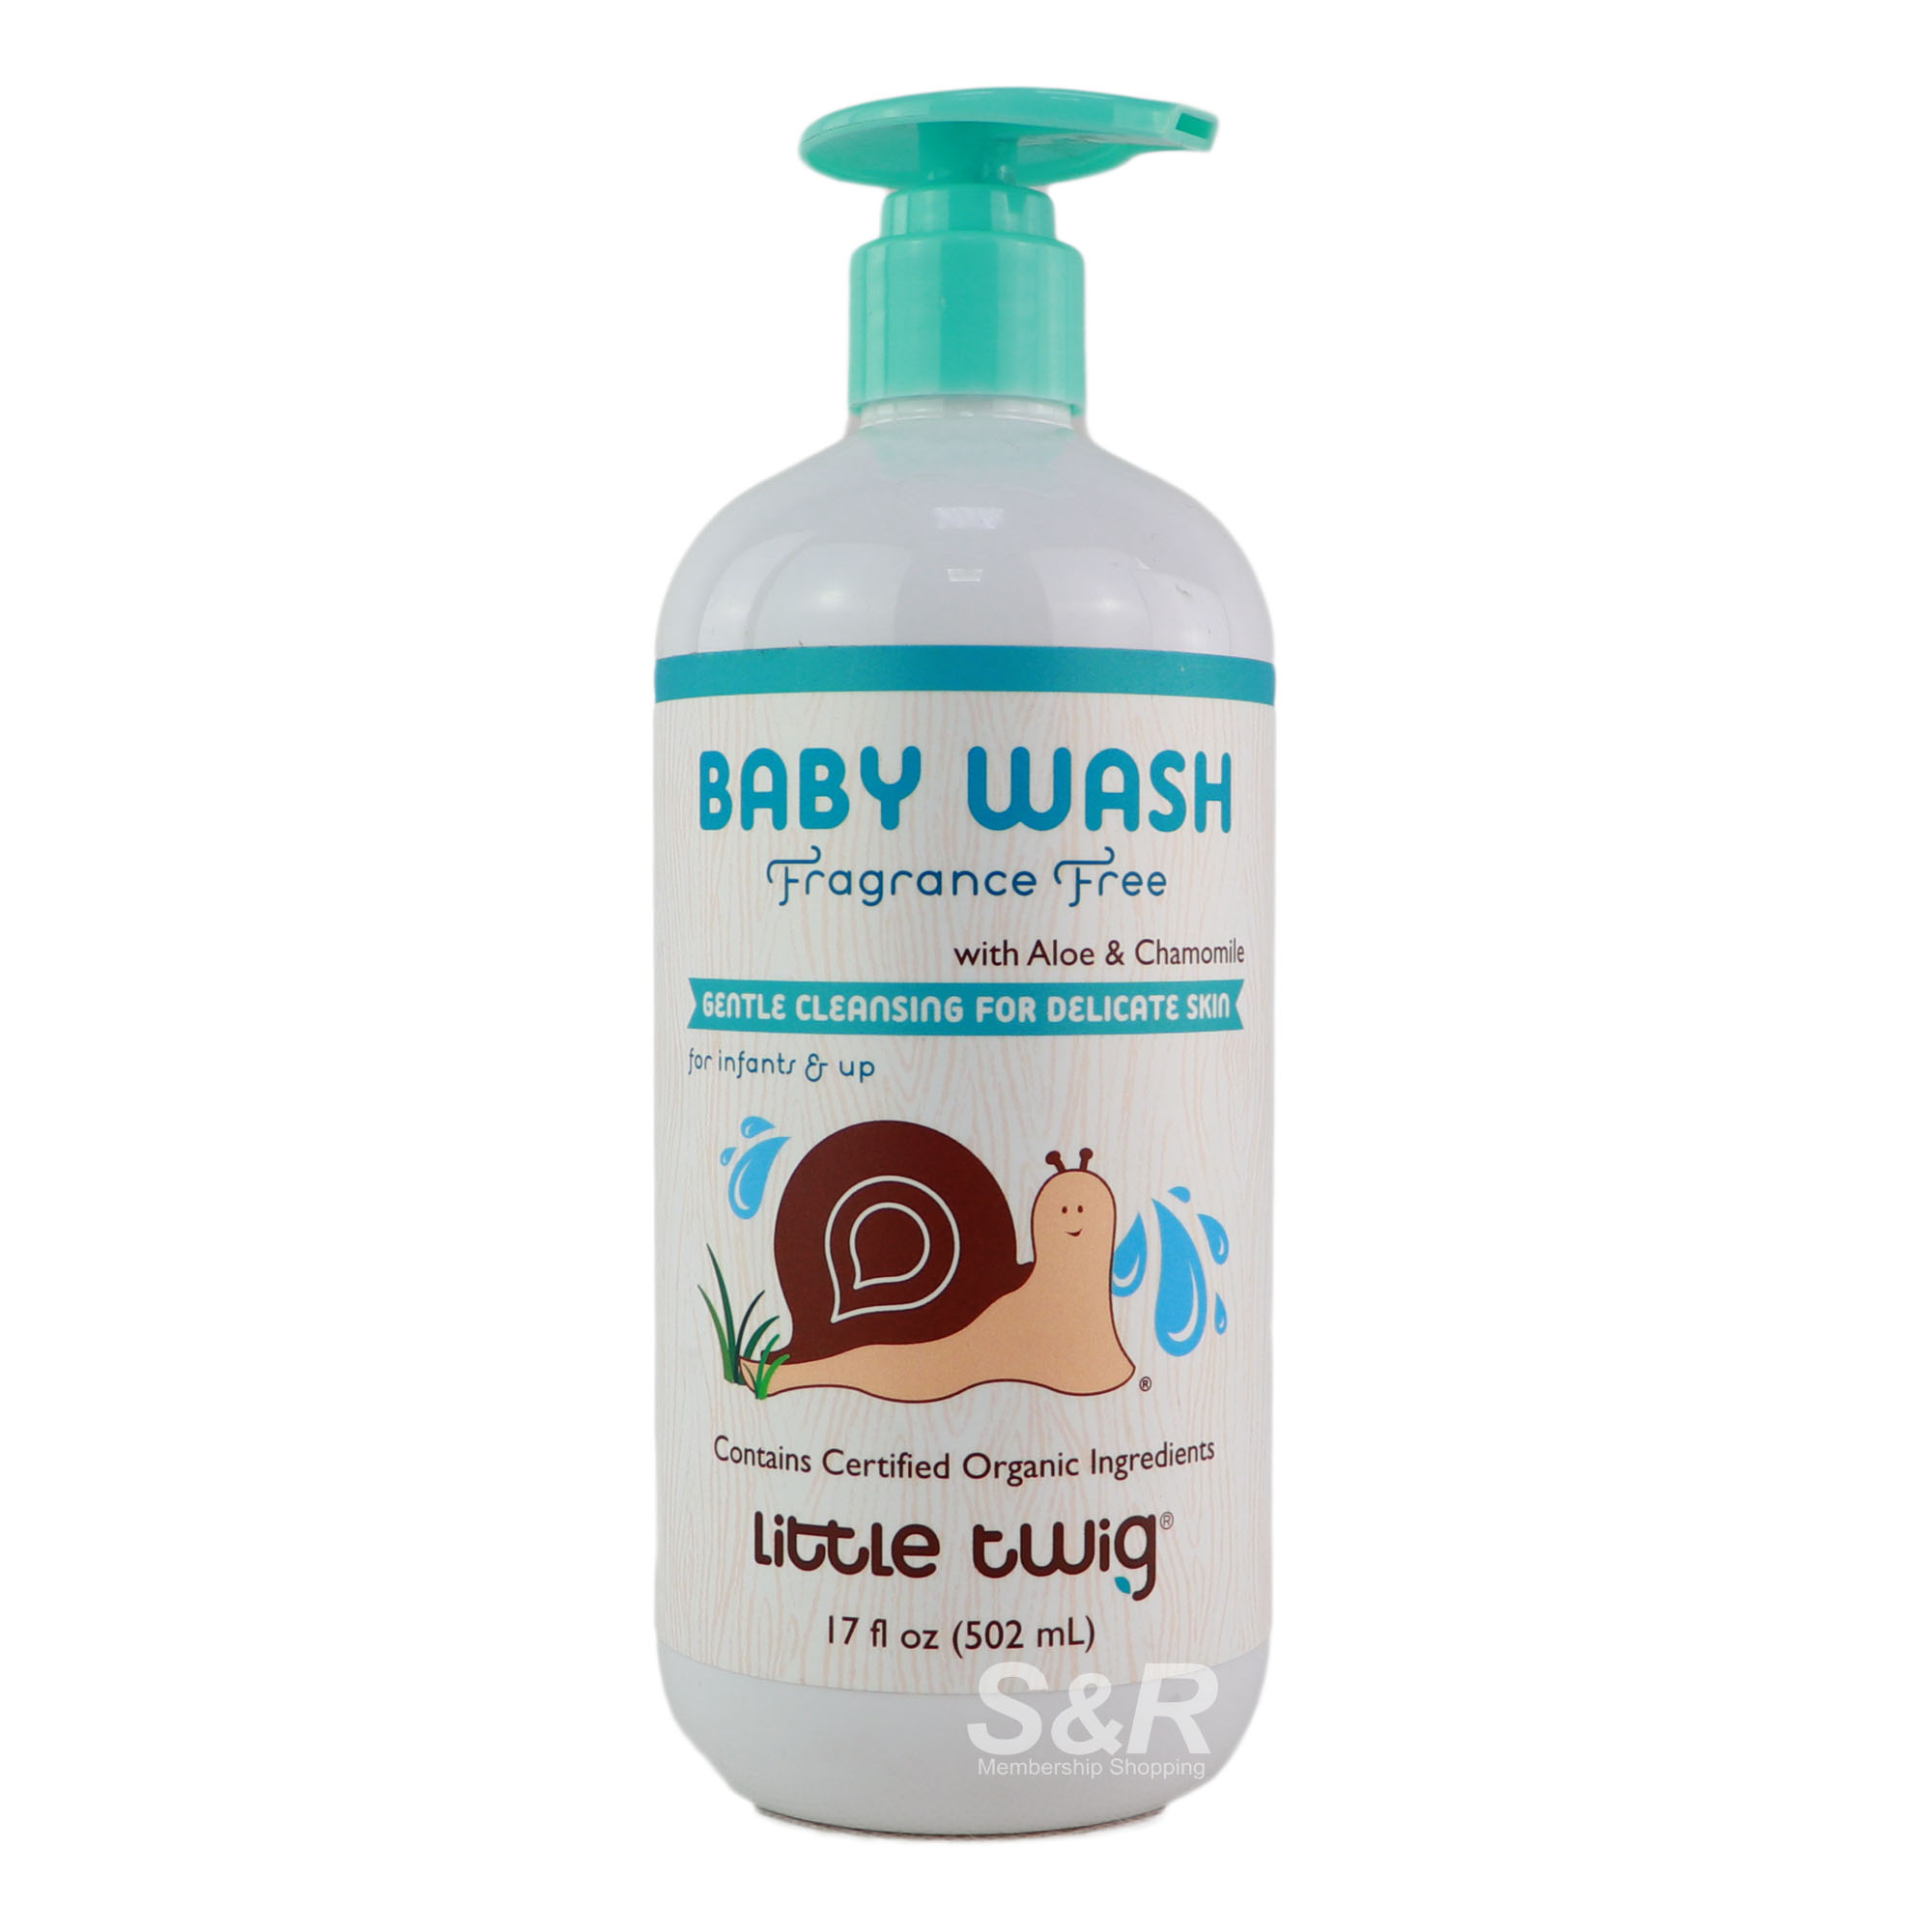 Little Twig Fragrance Free with Aloe and Chamomile Baby Wash 502mL